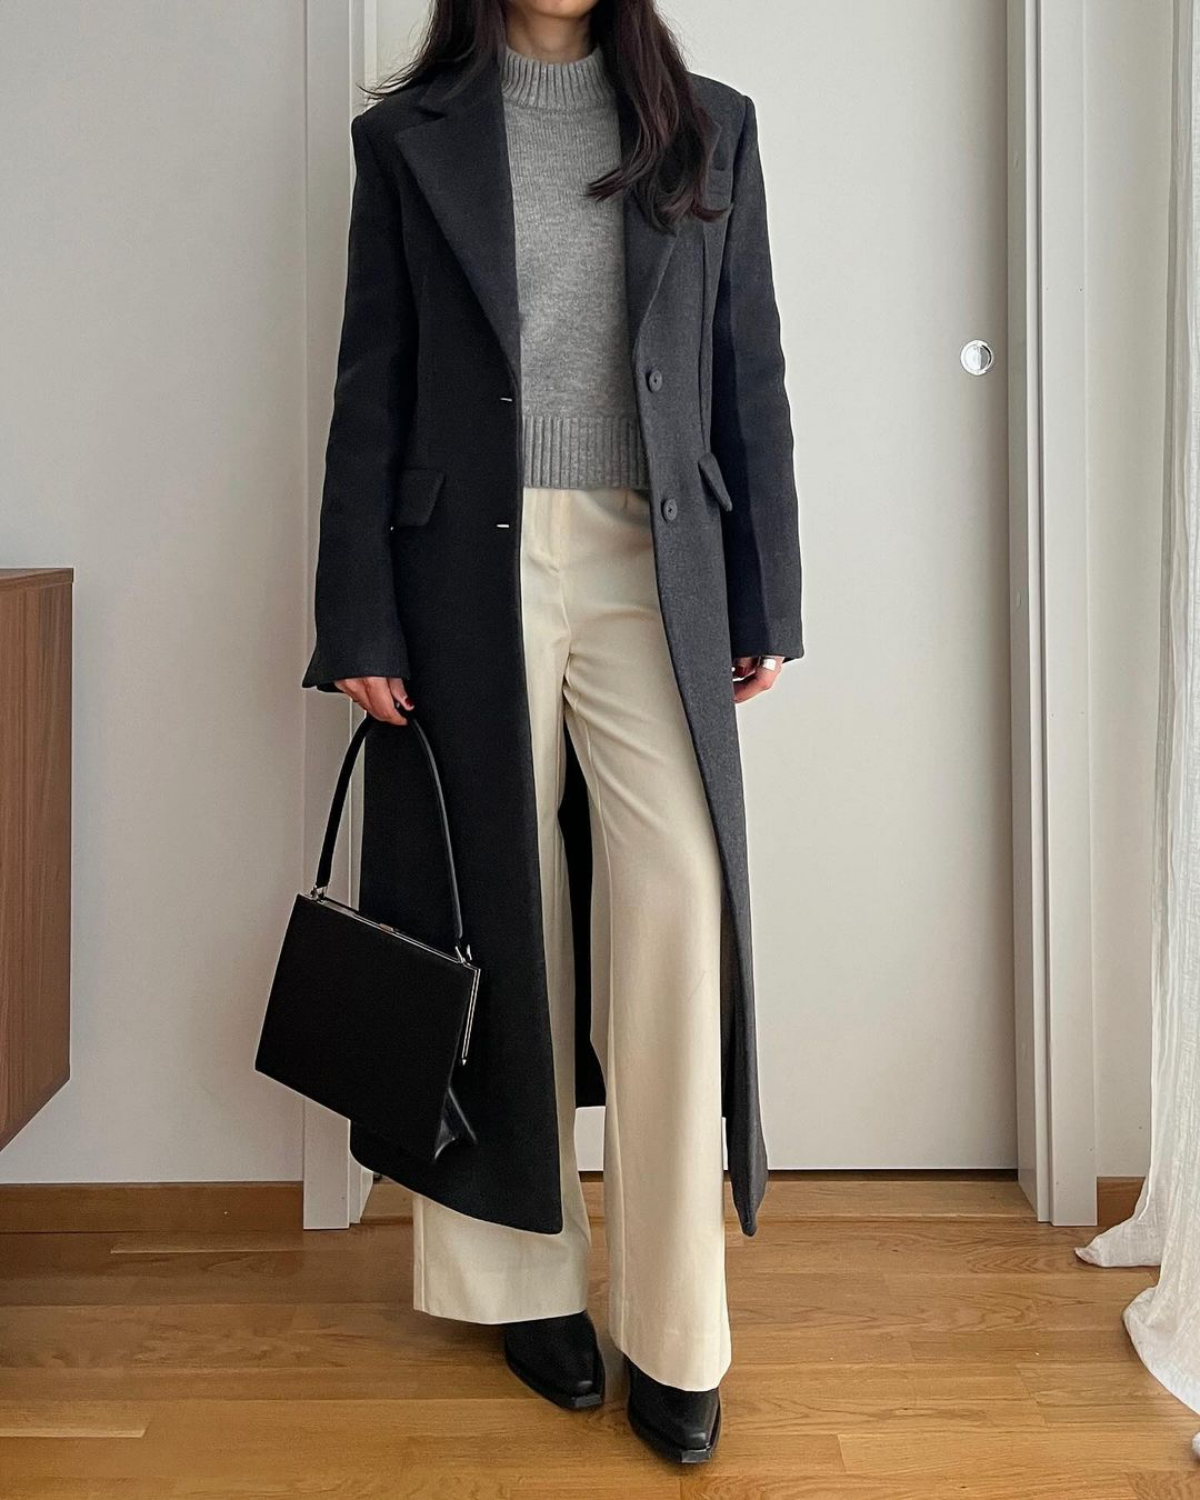 gray outfit for winter brunch